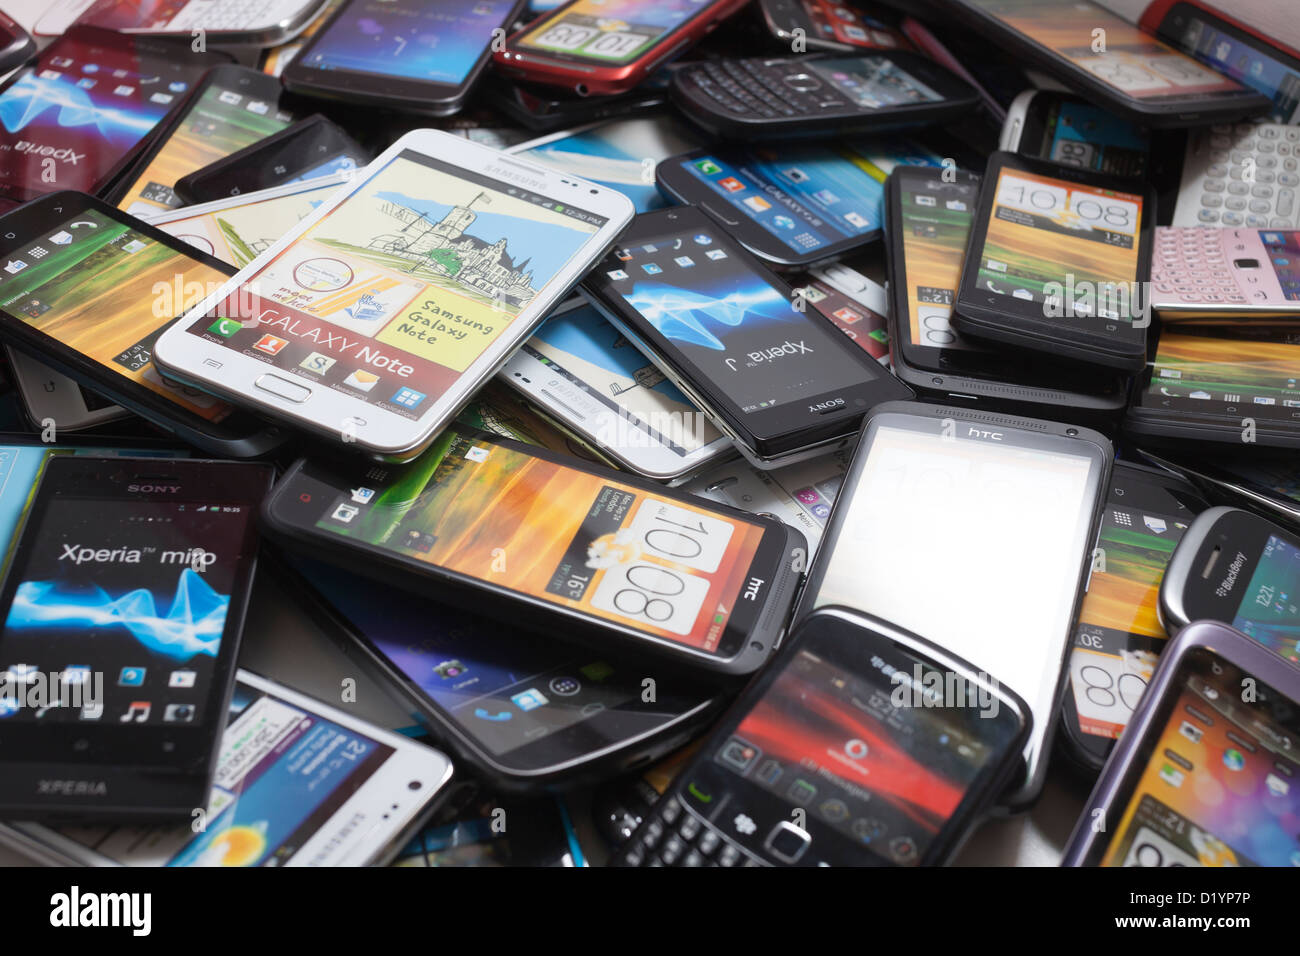 Pile of mobile phones. Stock Photo